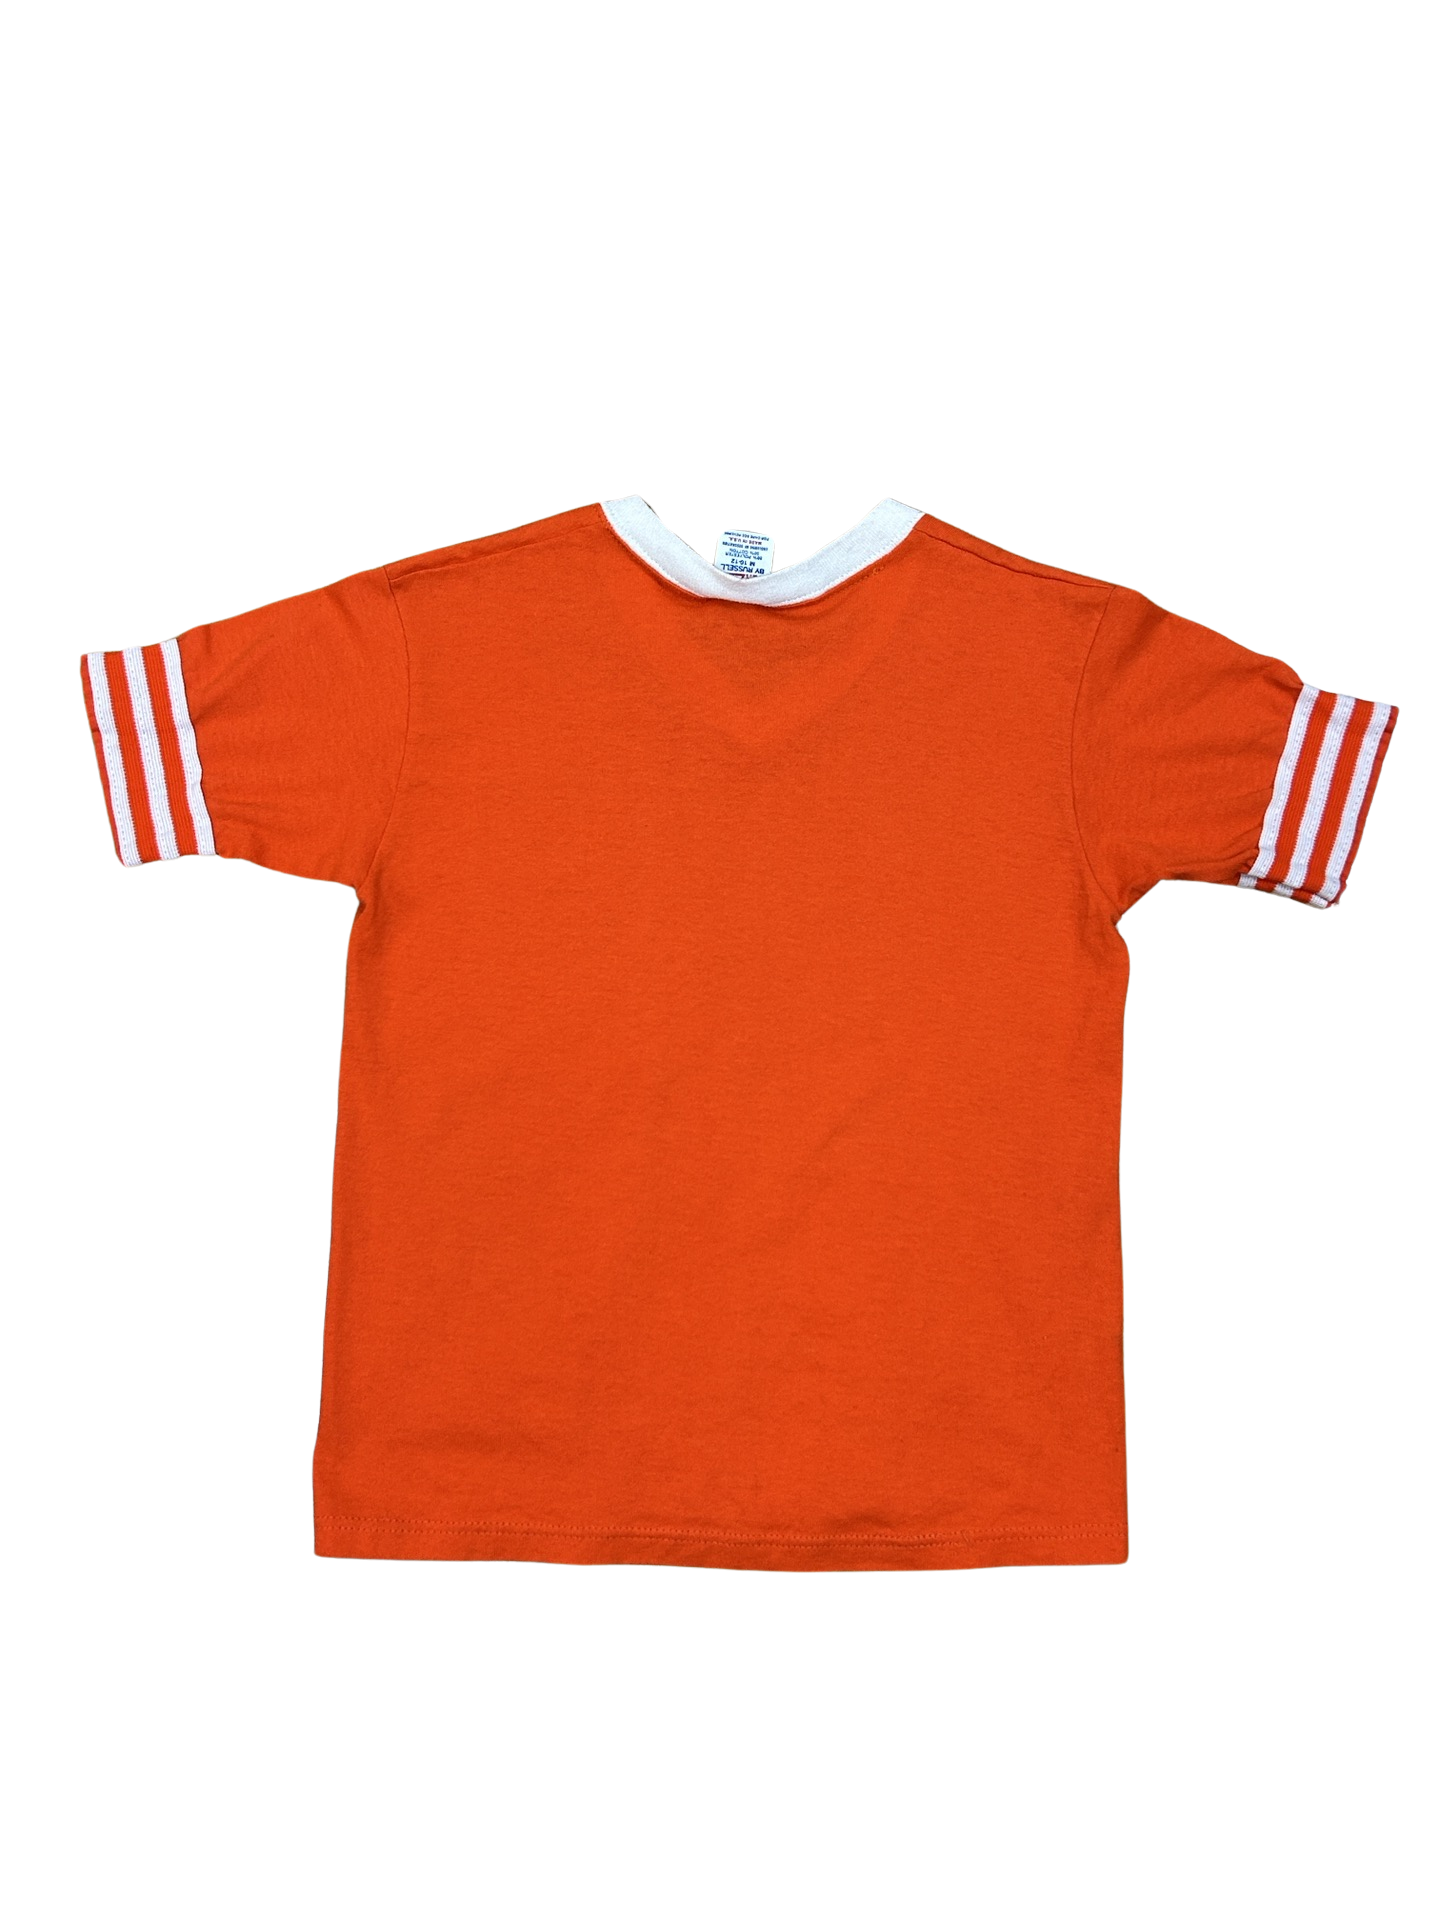 Tiger Scout BB tee